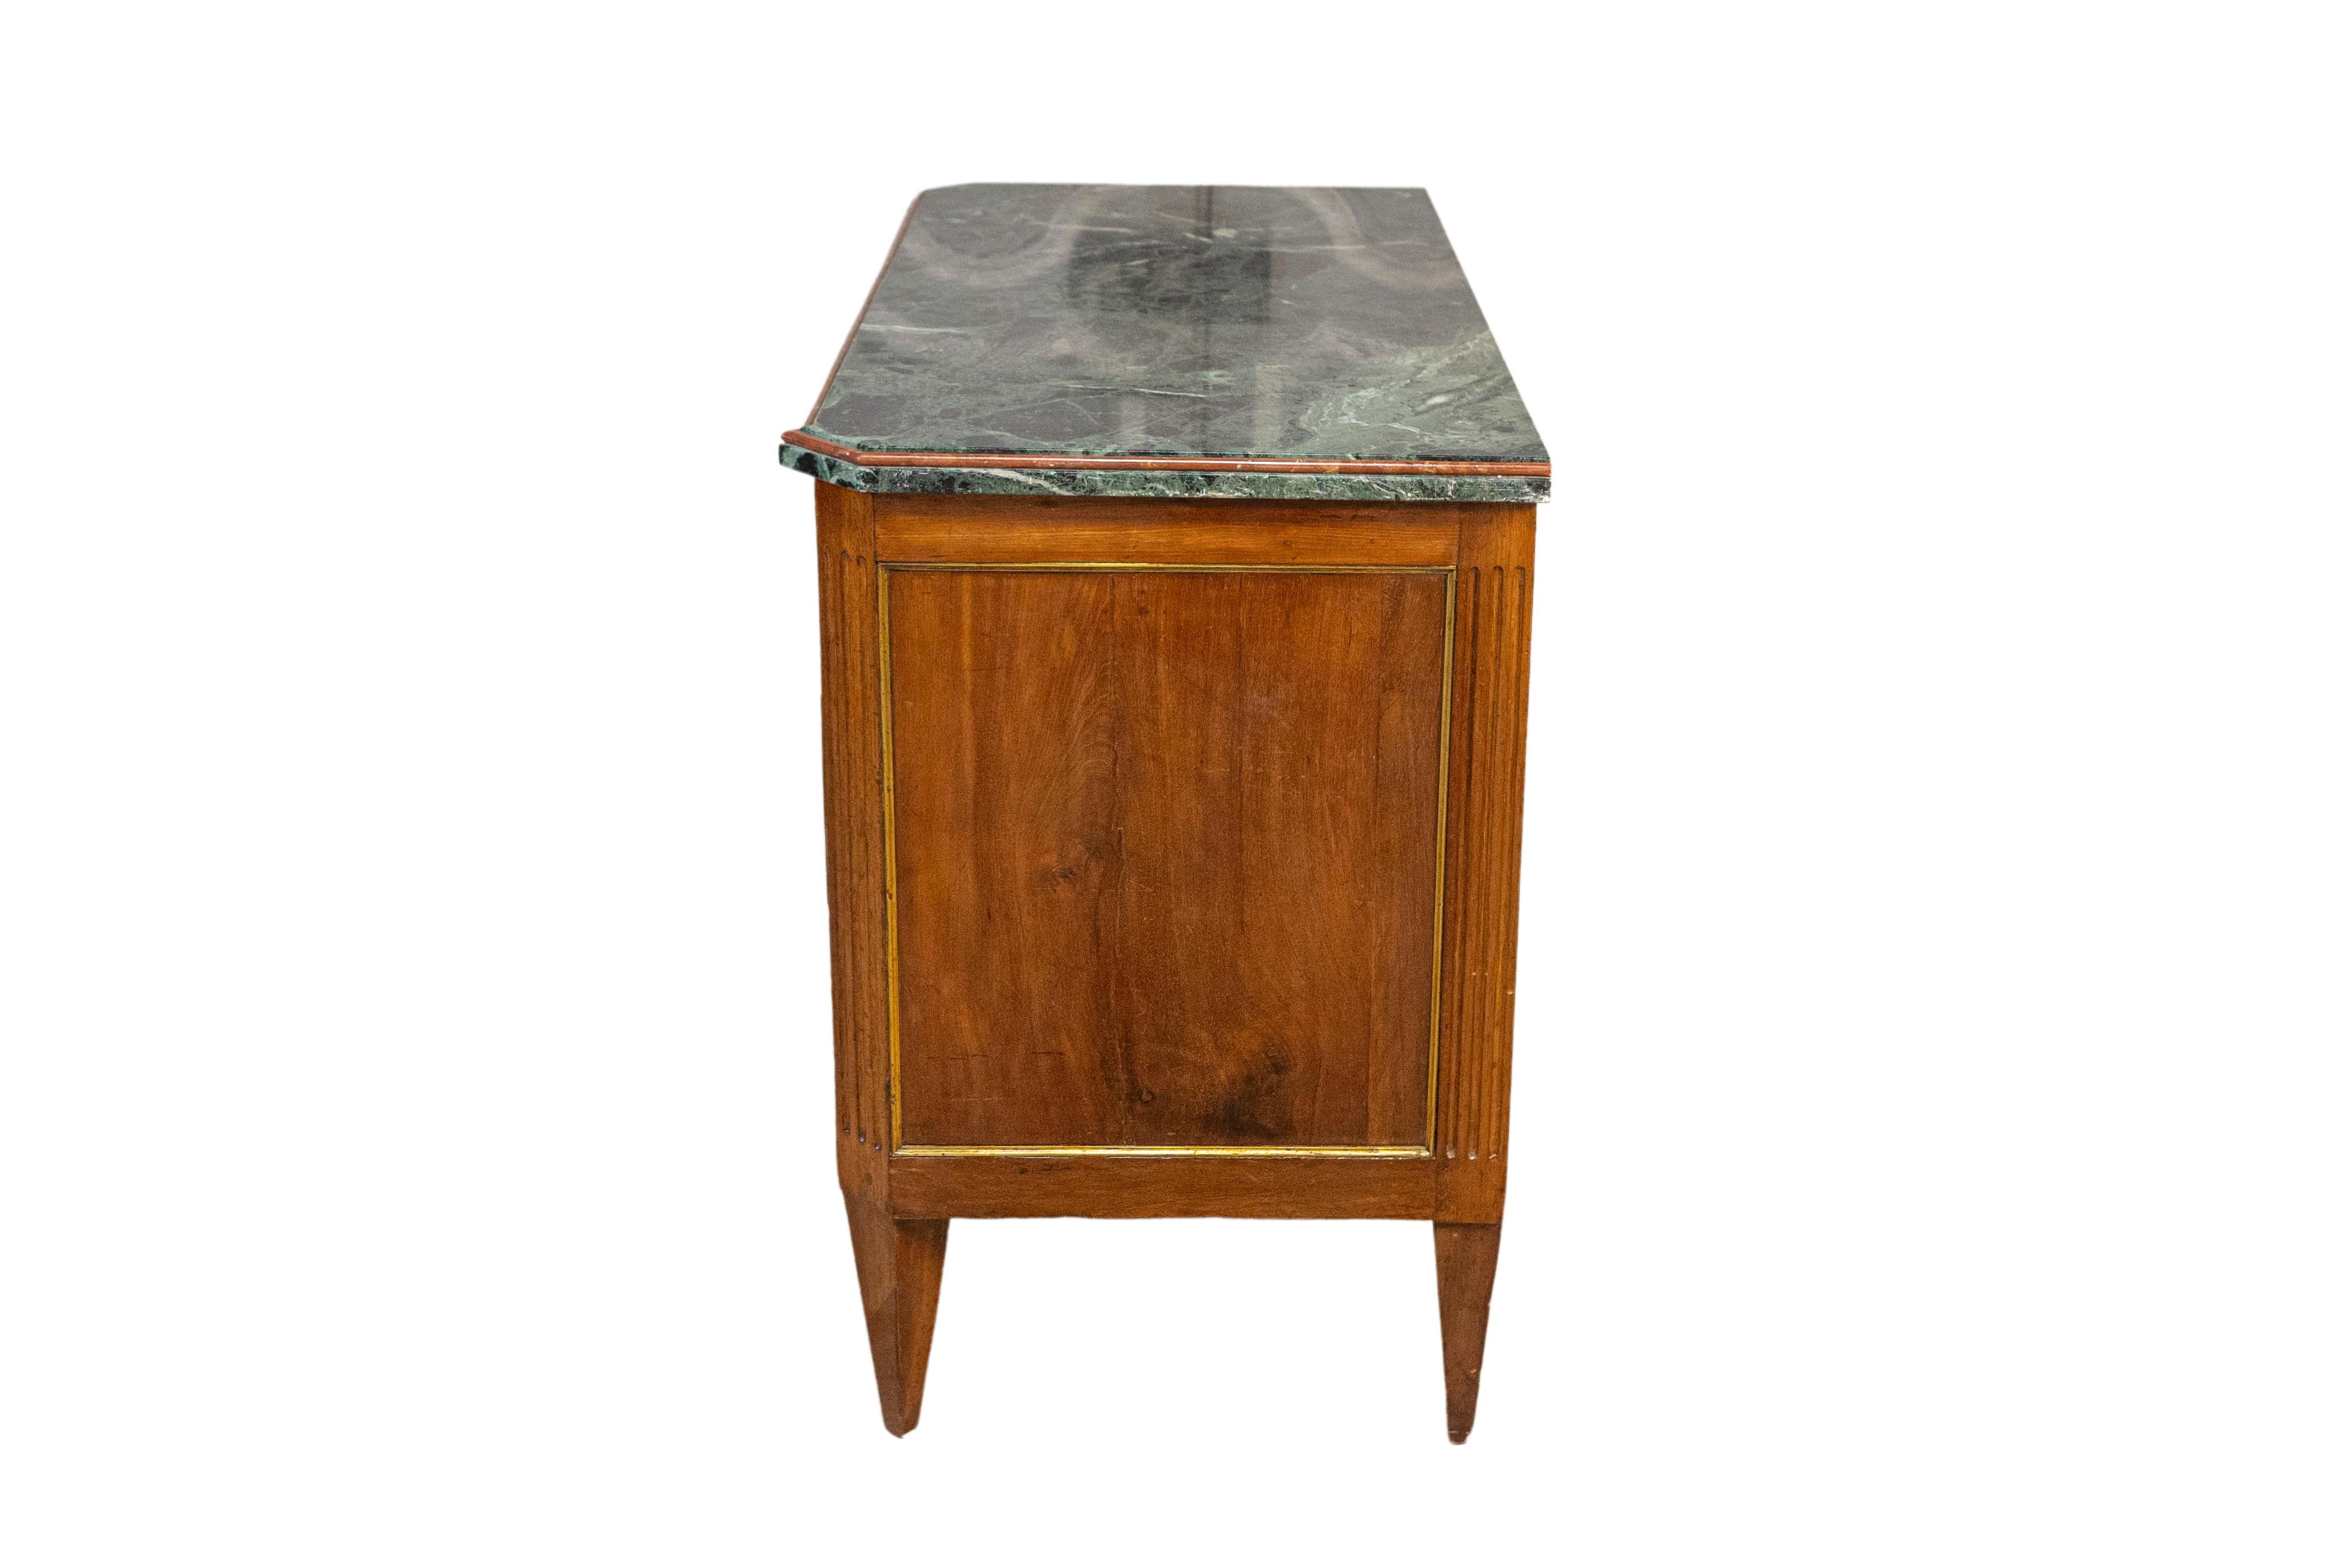 Carved Italian Piemontese 1890s Three-Drawer Walnut Commode with Dark Green Marble Top For Sale